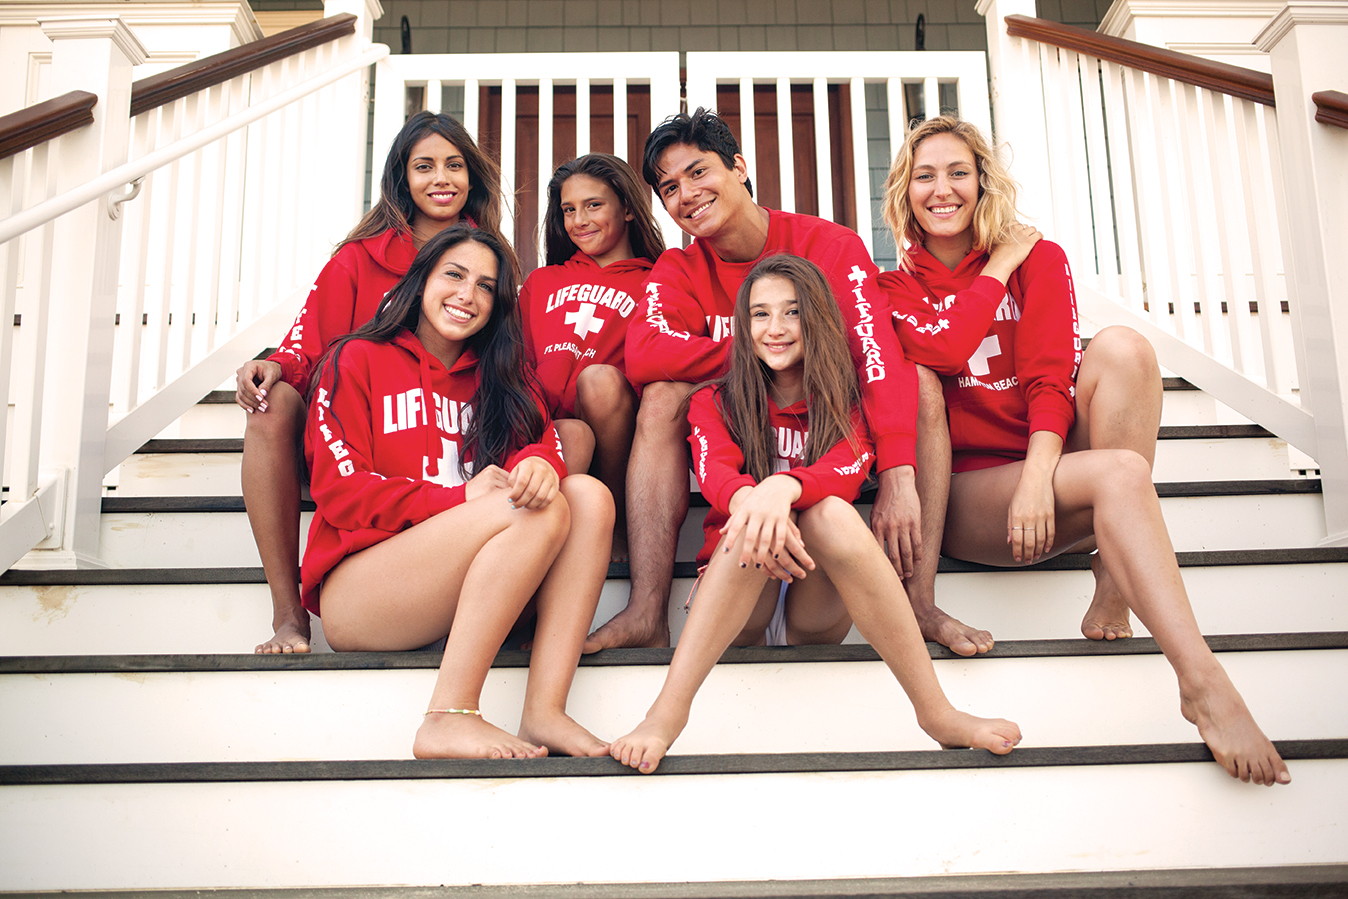 About Us - Who We Are - Beach Lifeguard